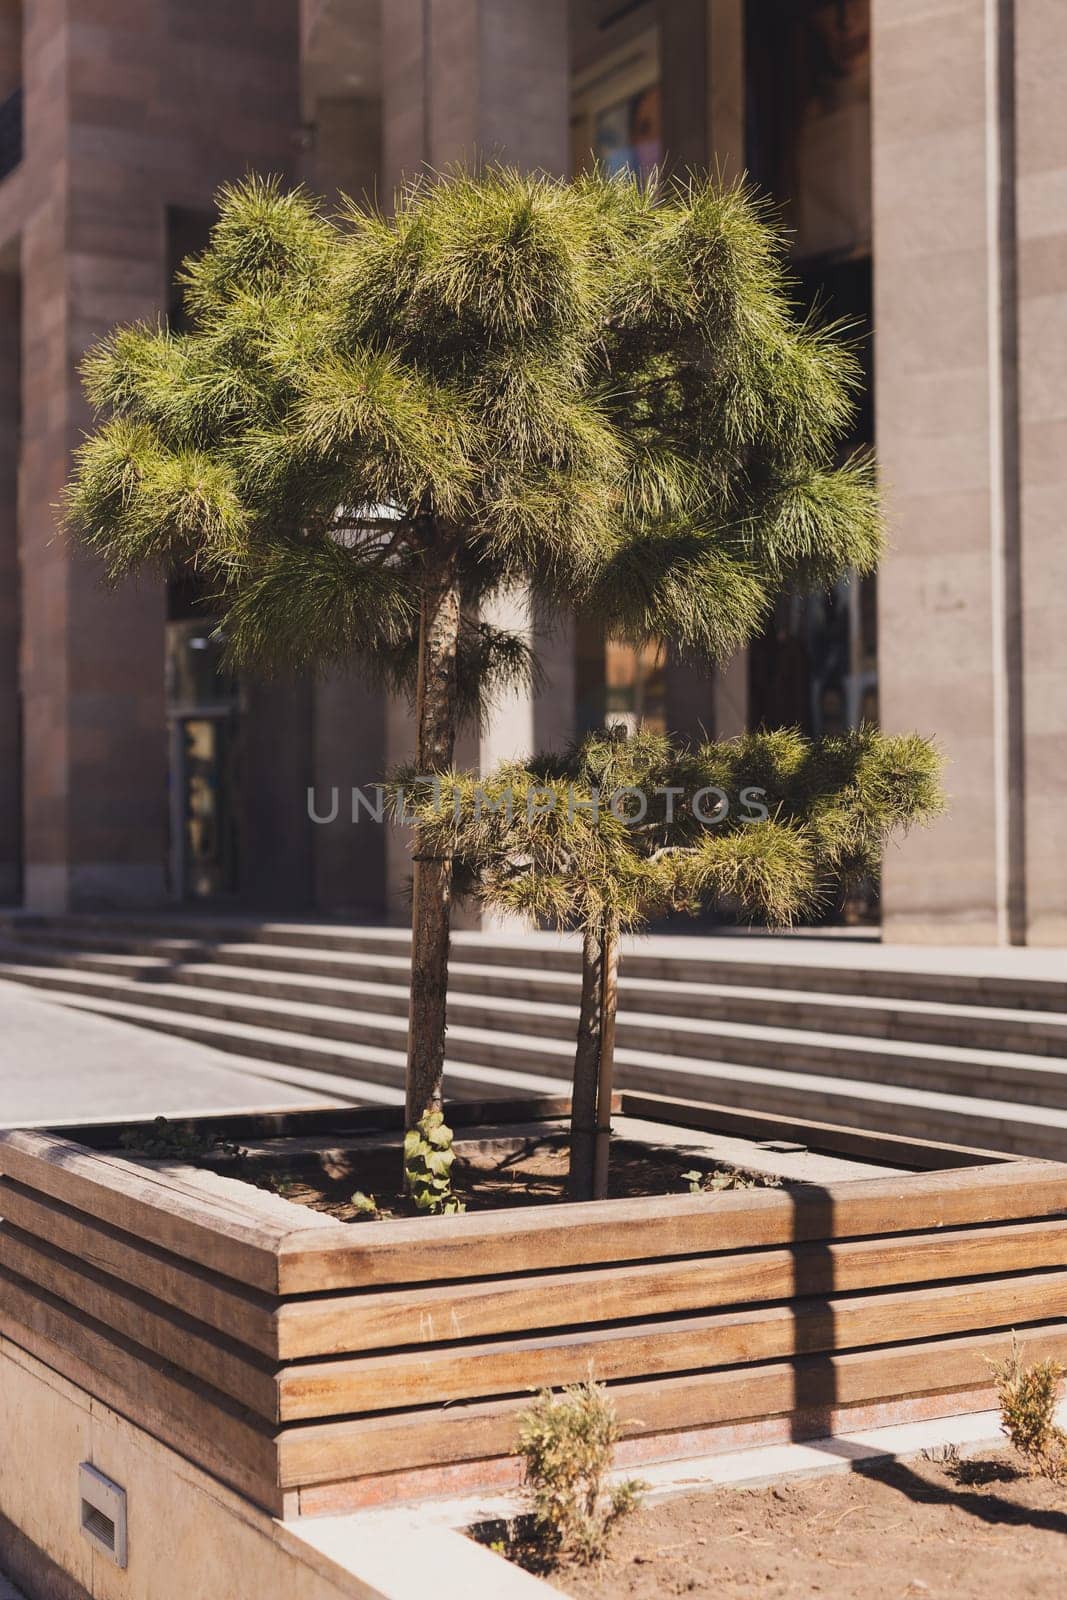 Wooden flower bed with pine tree. Originally floristic decorated street or alley in urban city centre by Satura86